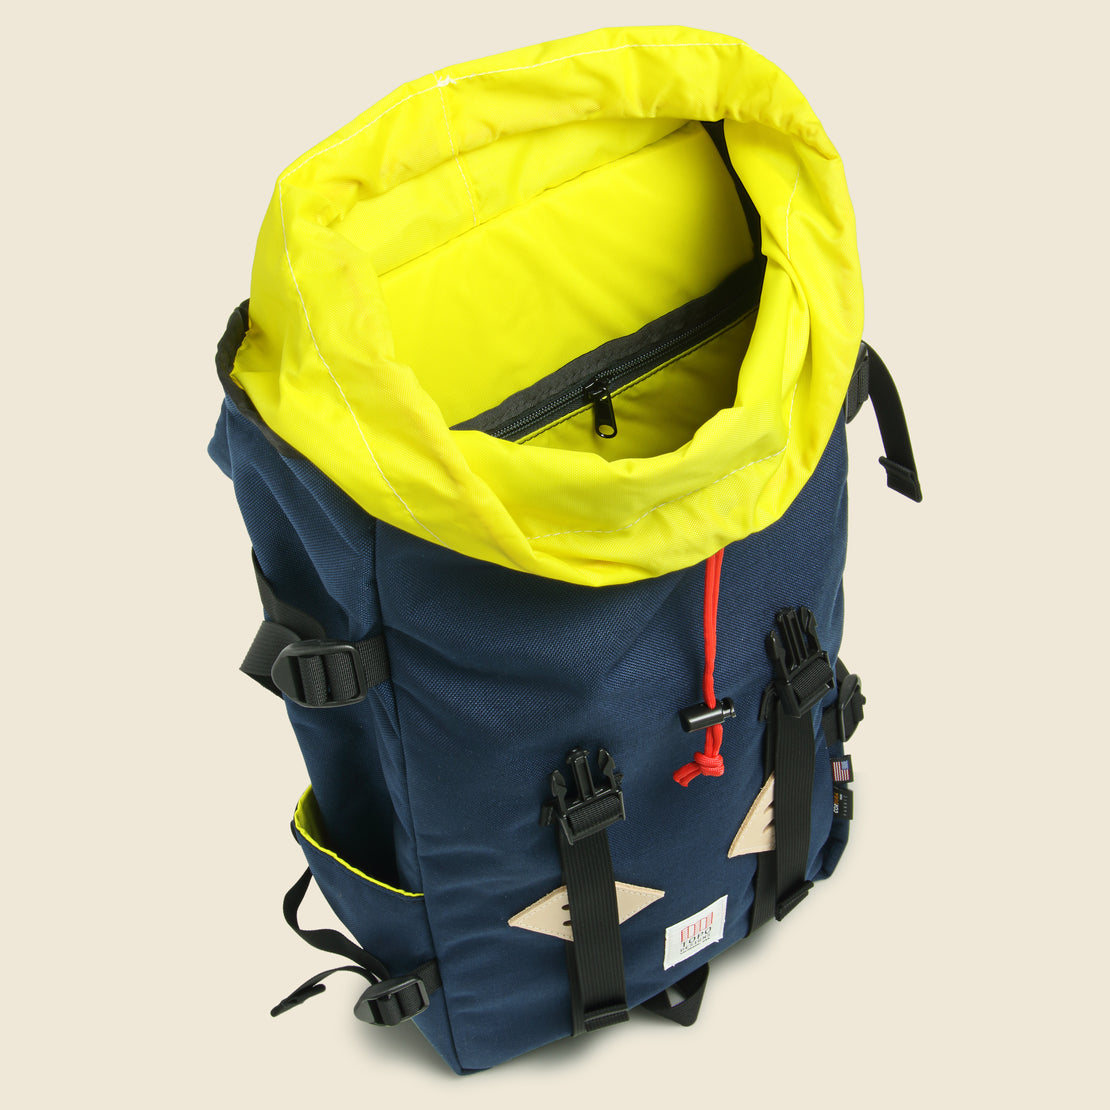 Klettersack - Navy - Topo Designs - STAG Provisions - Accessories - Bags / Luggage